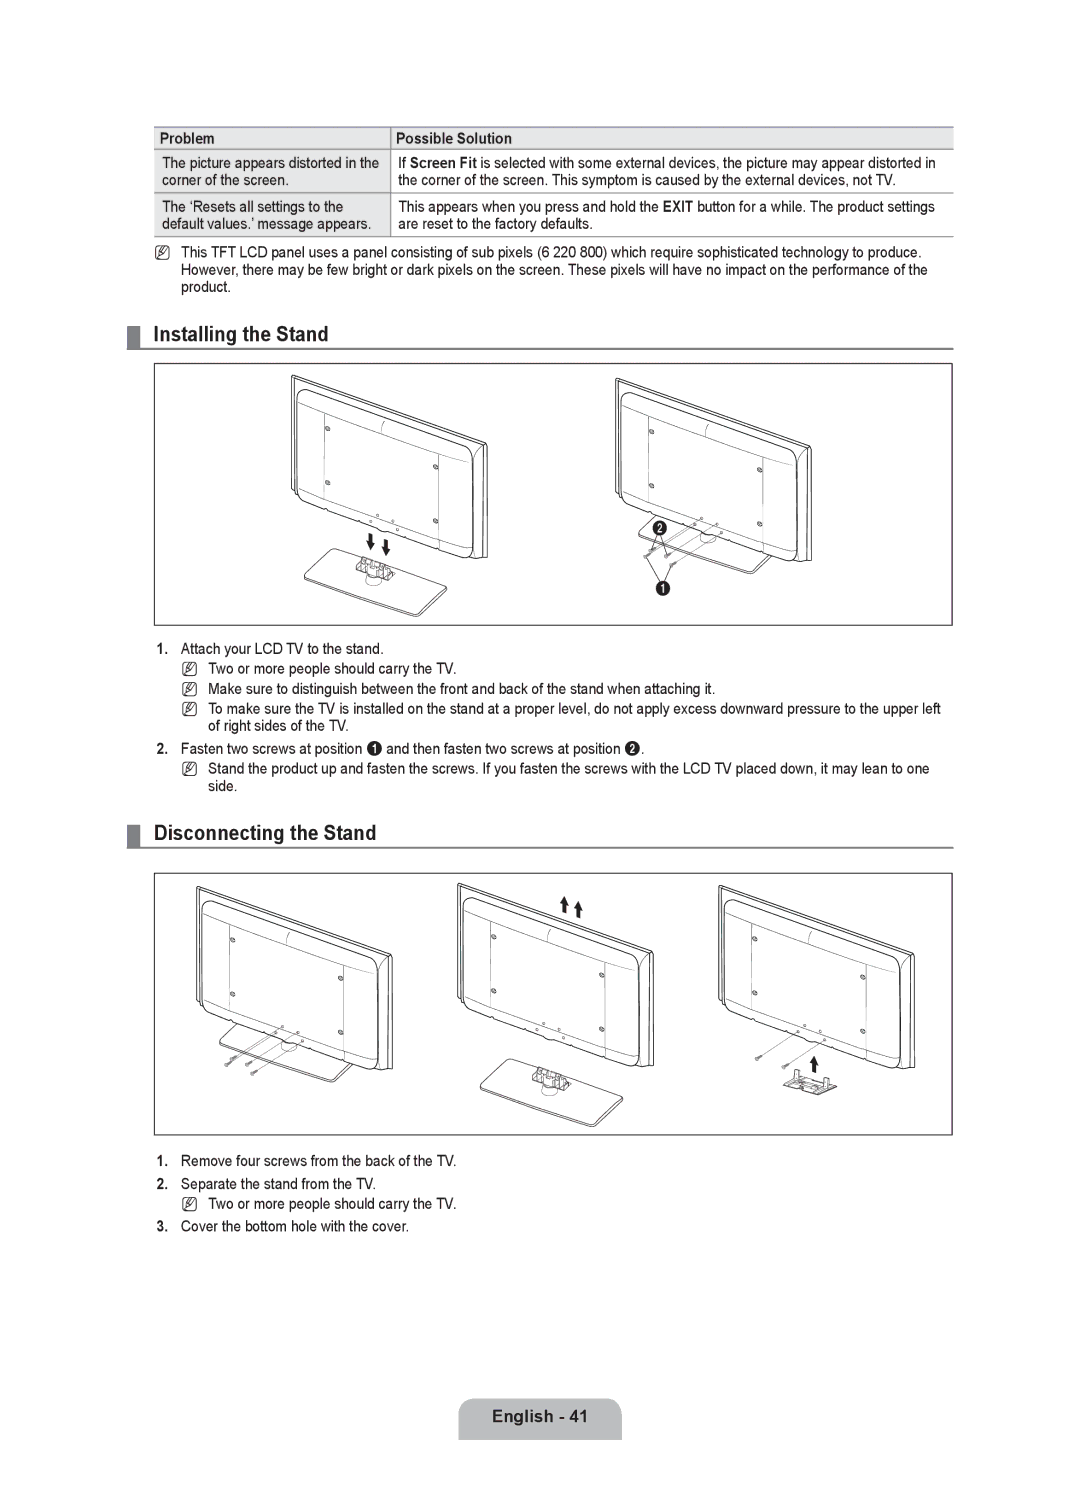 Samsung LN32B530, LN46B530 Installing the Stand, Disconnecting the Stand, Corner of the screen, ‘Resets all settings to 